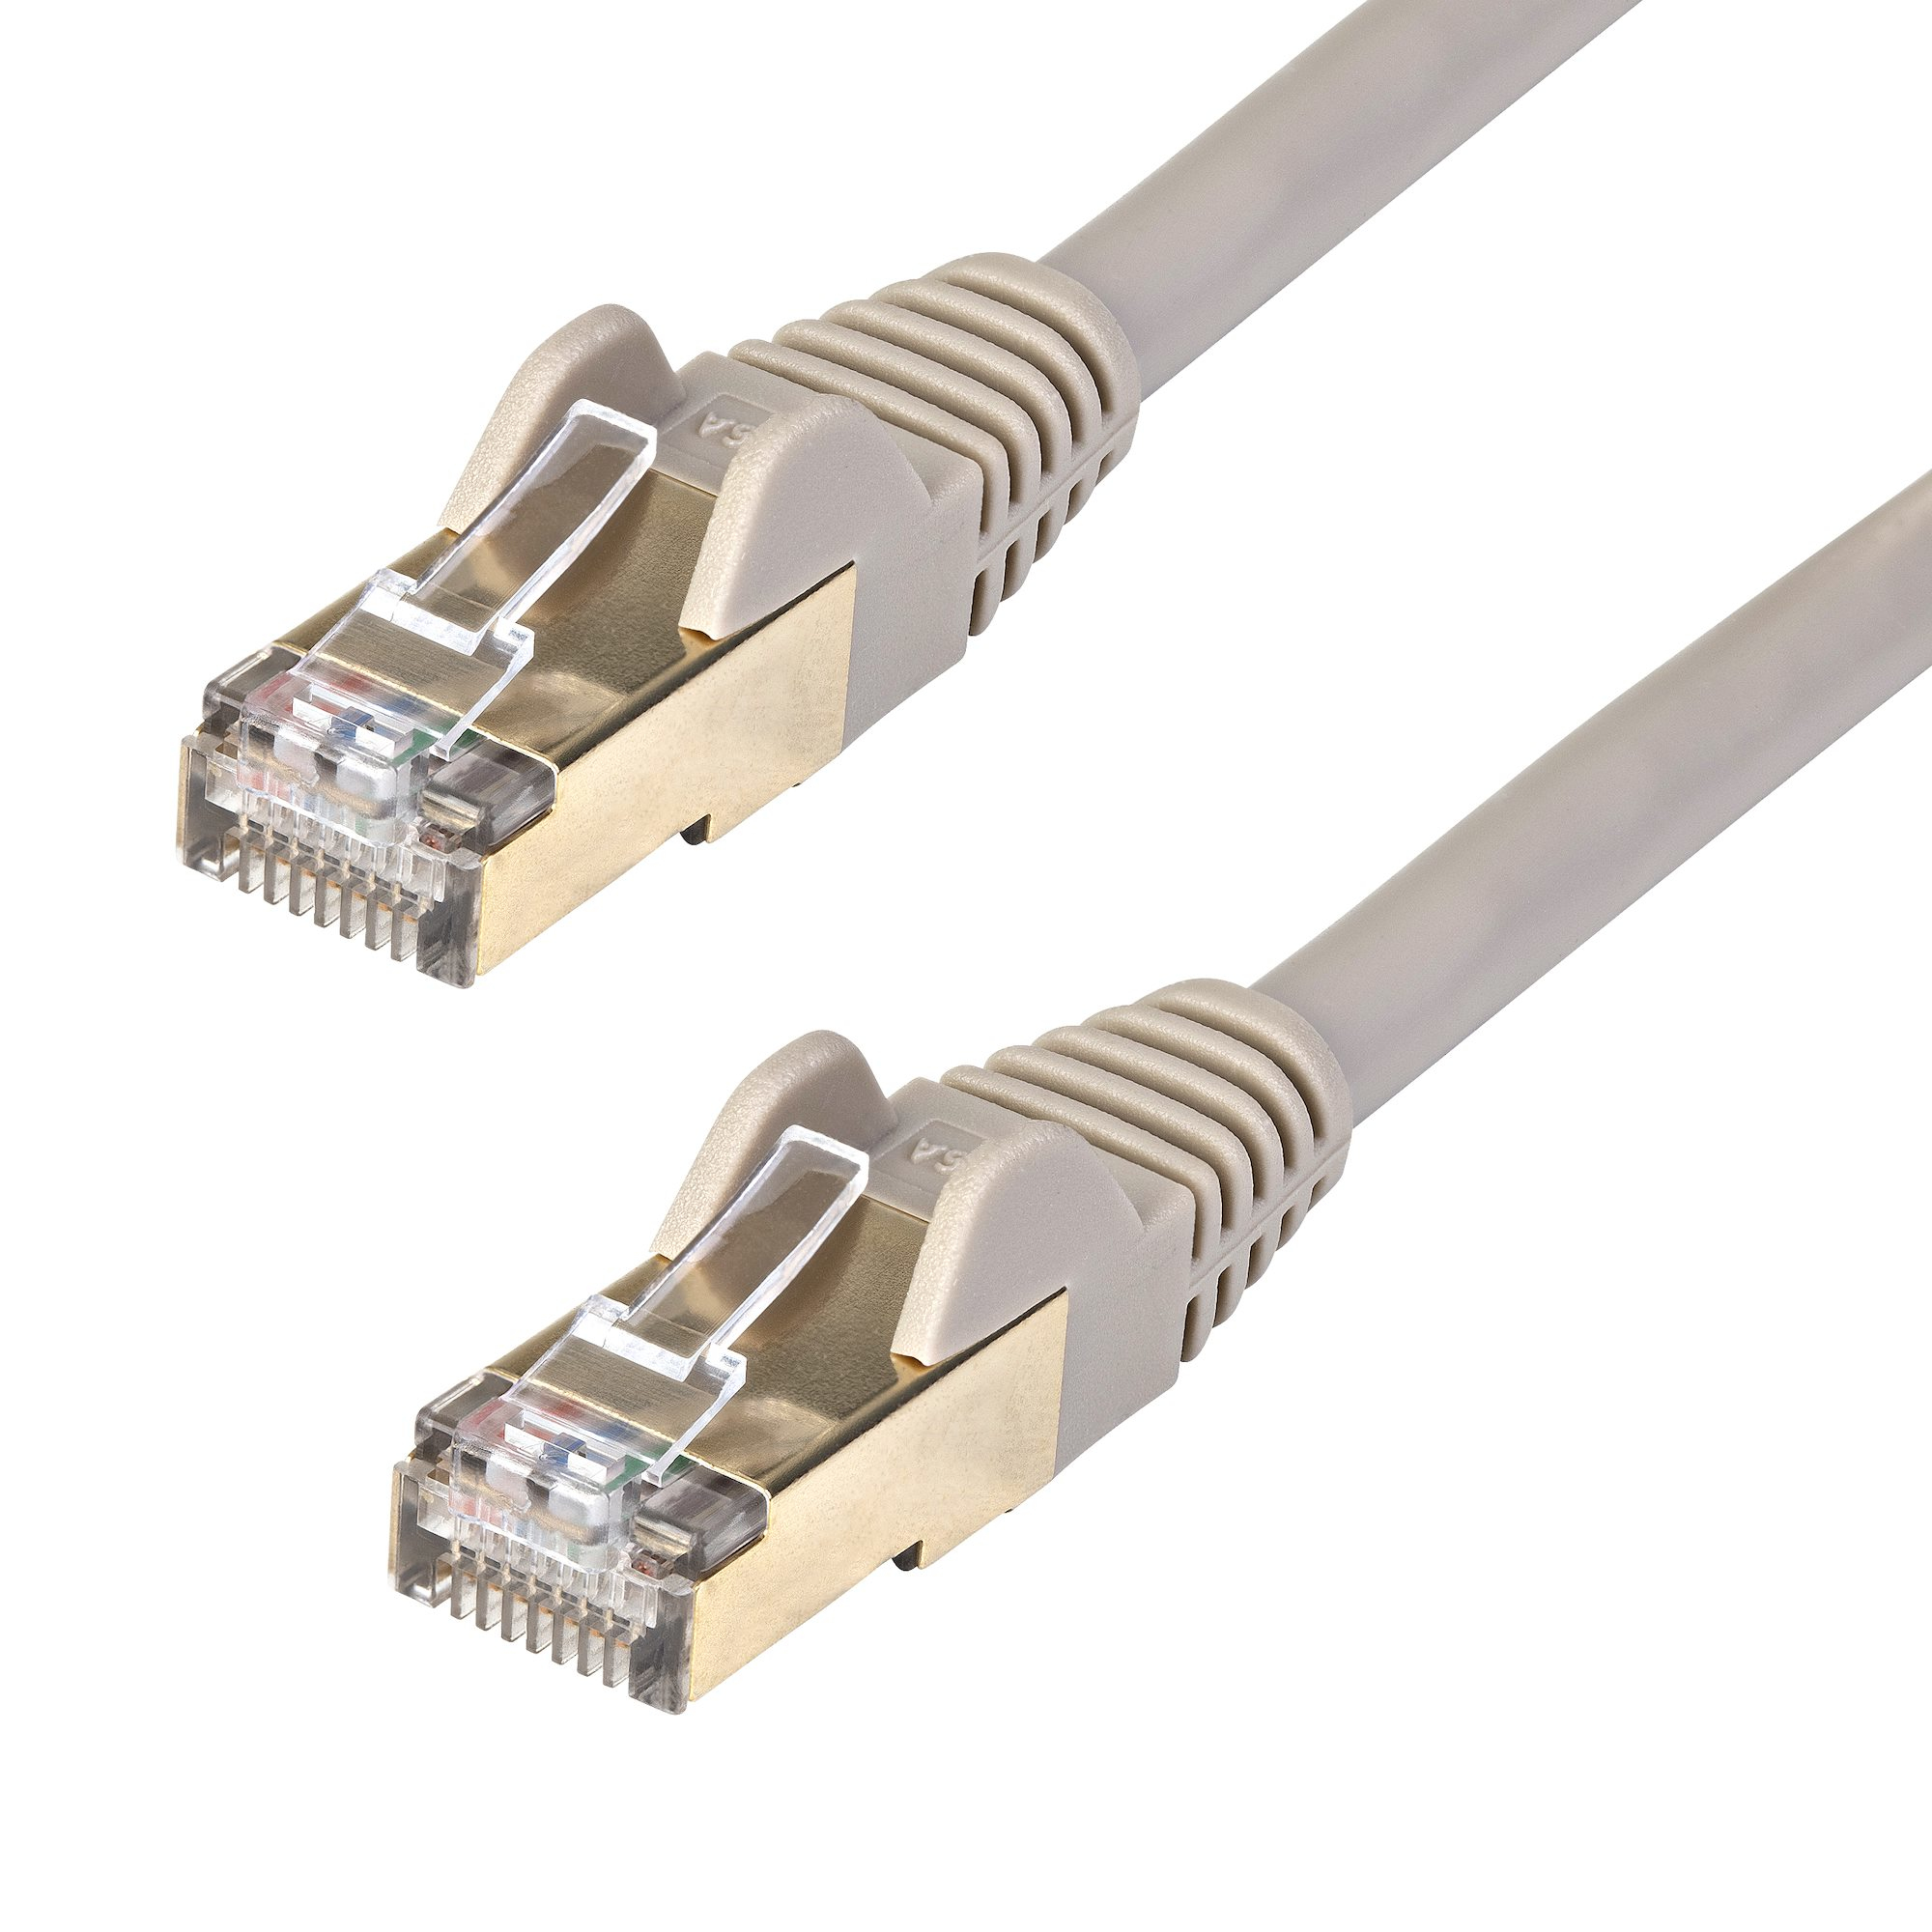 StarTech.com 5m CAT6A Ethernet Cable, 10 Gigabit Shielded Snagless RJ45 100W PoE Patch Cord, CAT 6A 10GbE STP Network Cable w/Strain Relief, Grey, Fluke Tested/UL Certified Wiring/TIA - Category 6A - 26AWG (6ASPAT5MGR)